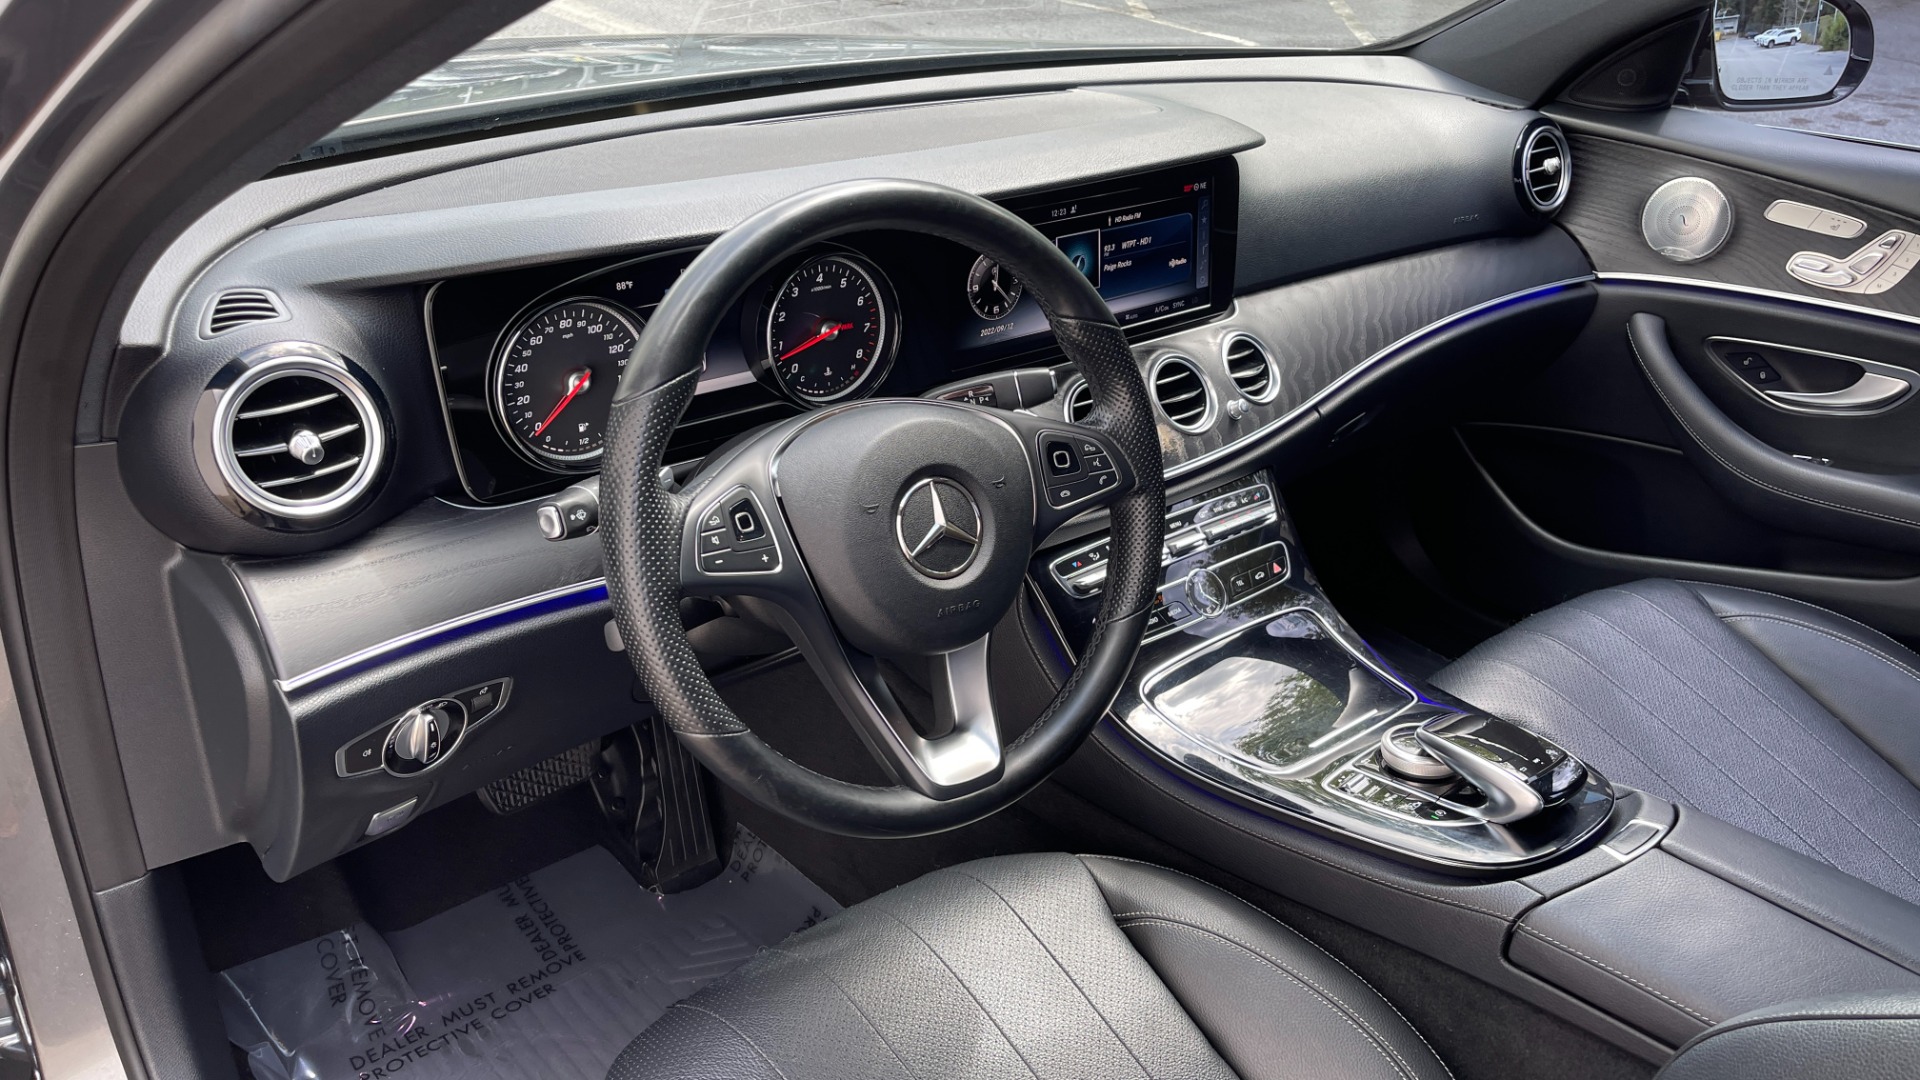 Used 2017 Mercedes-Benz E-Class E300 LUXURY / UPGRADED WHEELS / SPORT WHEEL / PREMIUM 1 / BURMESTER AUDIO for sale $29,995 at Formula Imports in Charlotte NC 28227 11